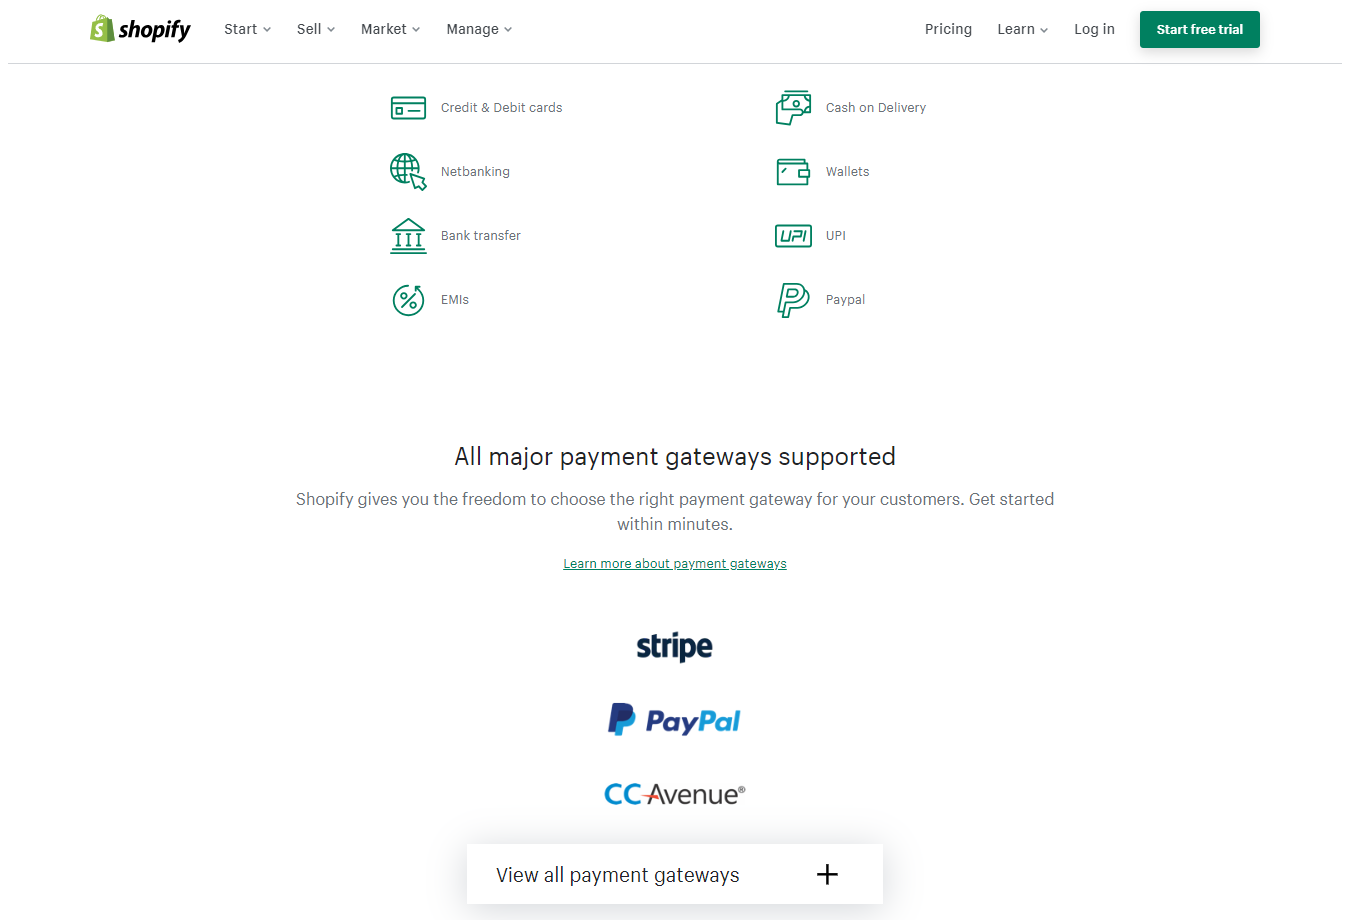 Payments supported by Shopify